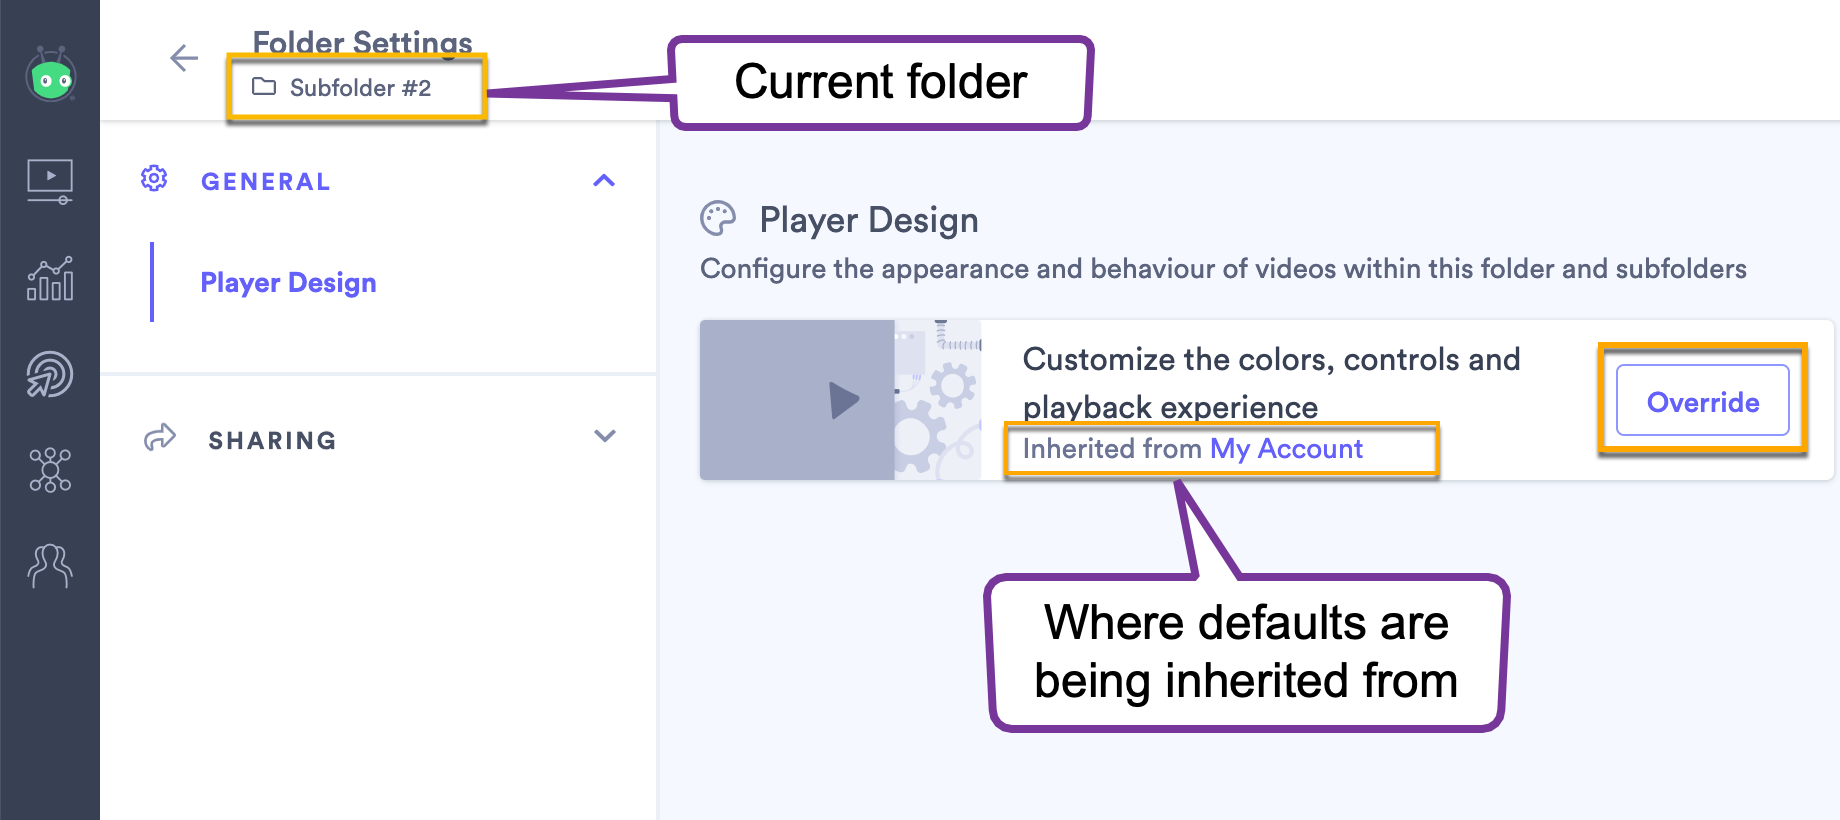 The folder settings page indicating that video design defaults are being inherited from another folder